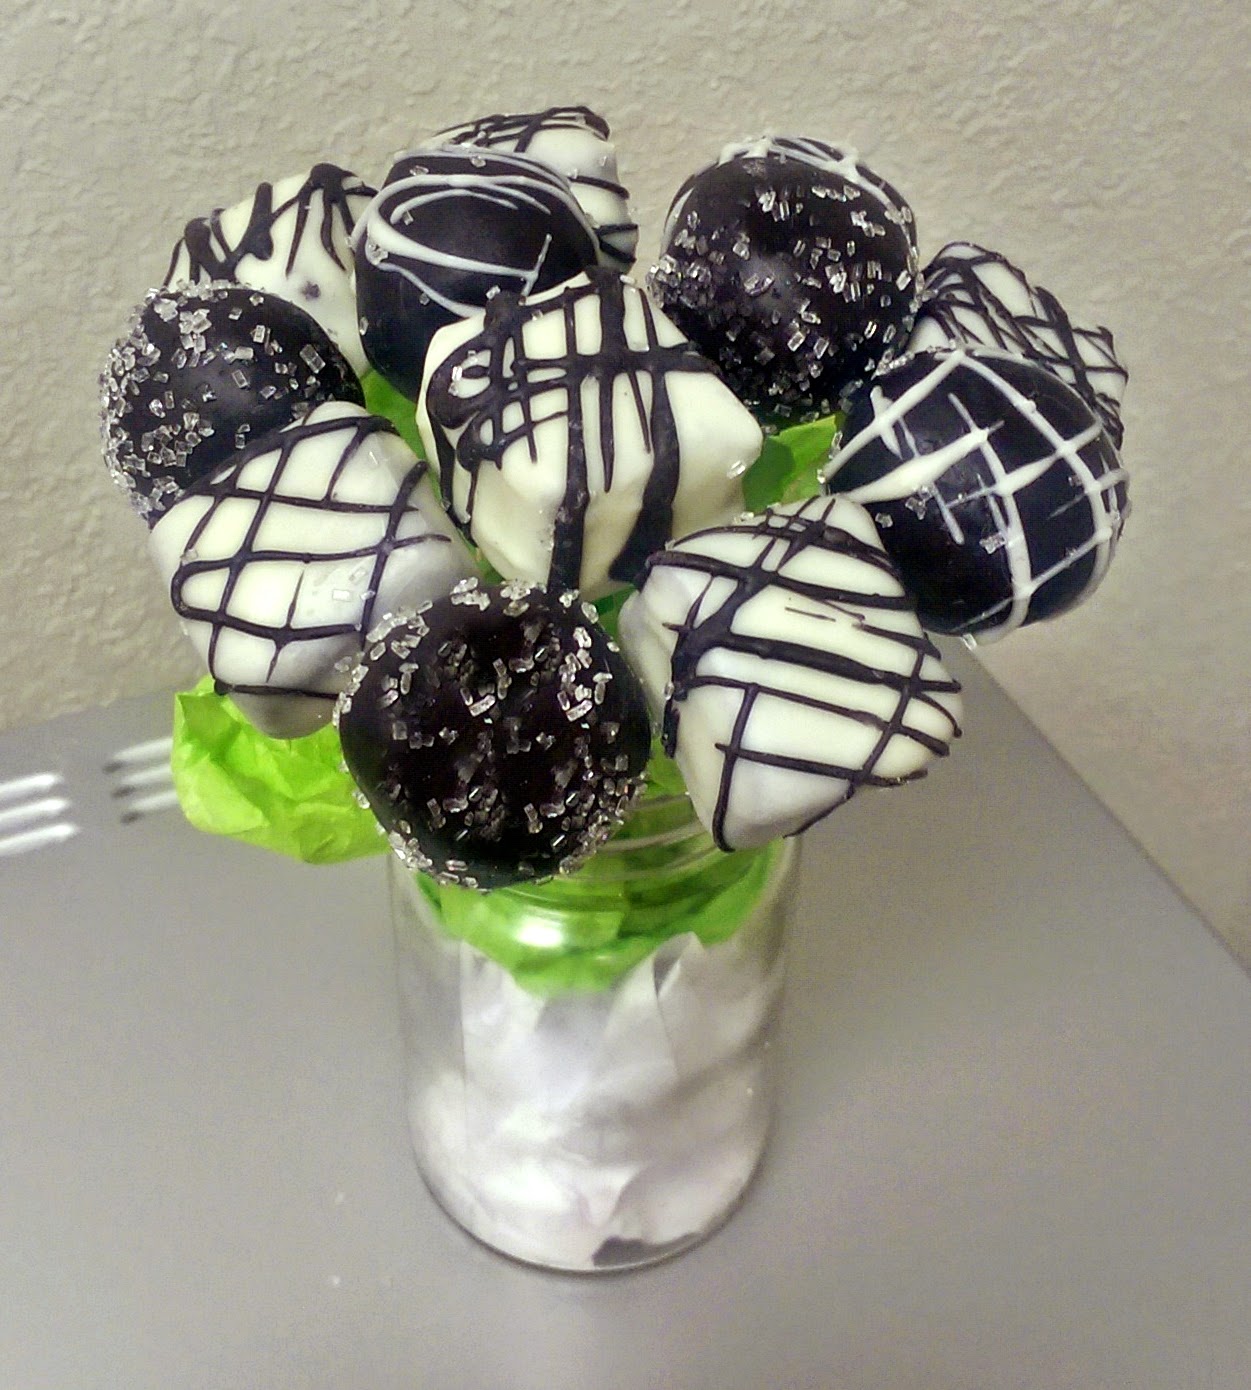 Meg-made Creations: Black and White Cake Pops, Chocolate Drizzle Cake Balls